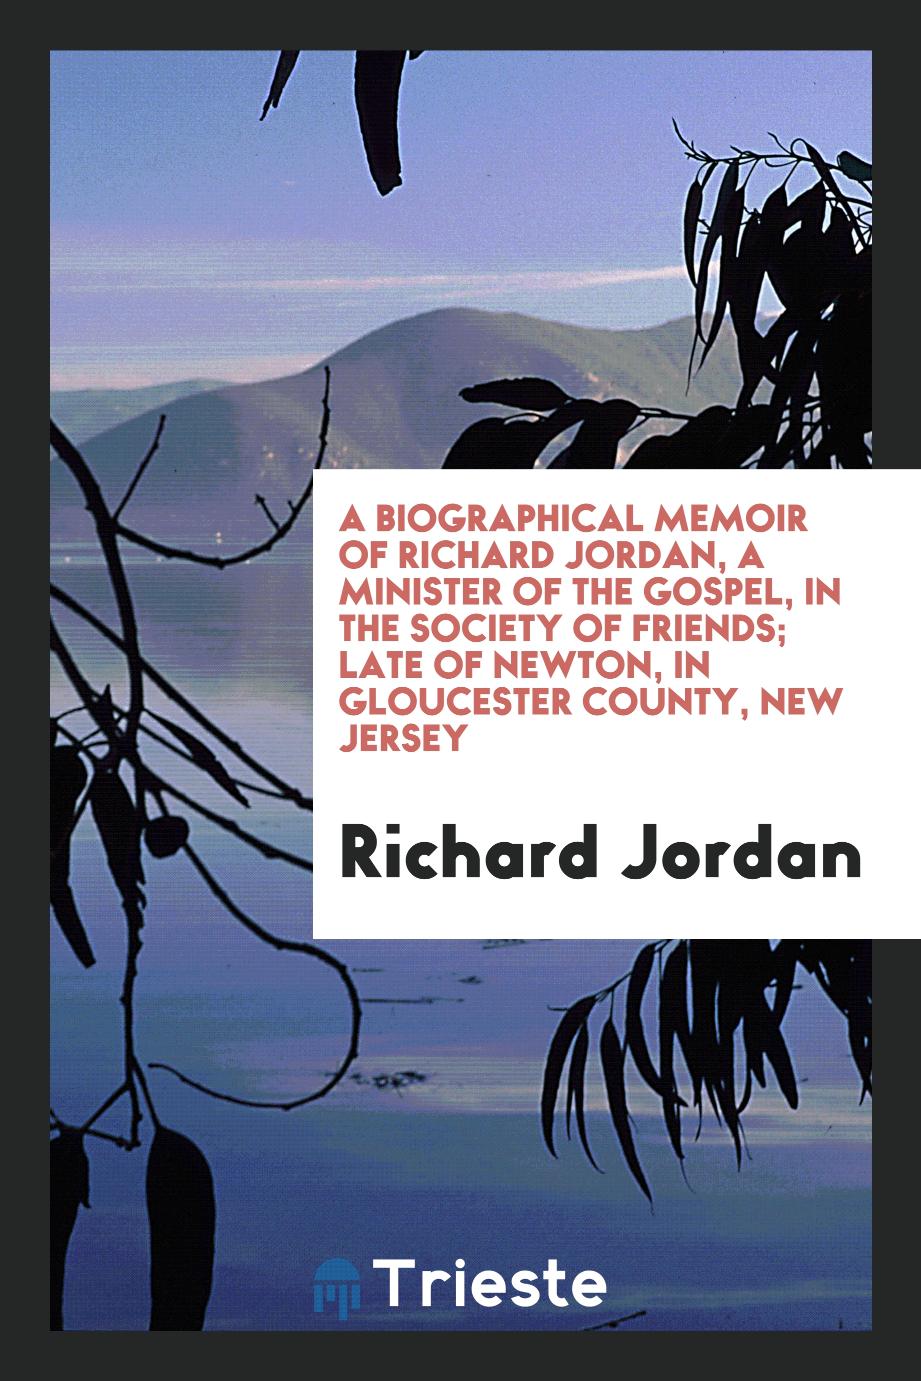 A Biographical Memoir of Richard Jordan, a minister of the gospel, in the society of friends; late of Newton, in Gloucester county, New Jersey